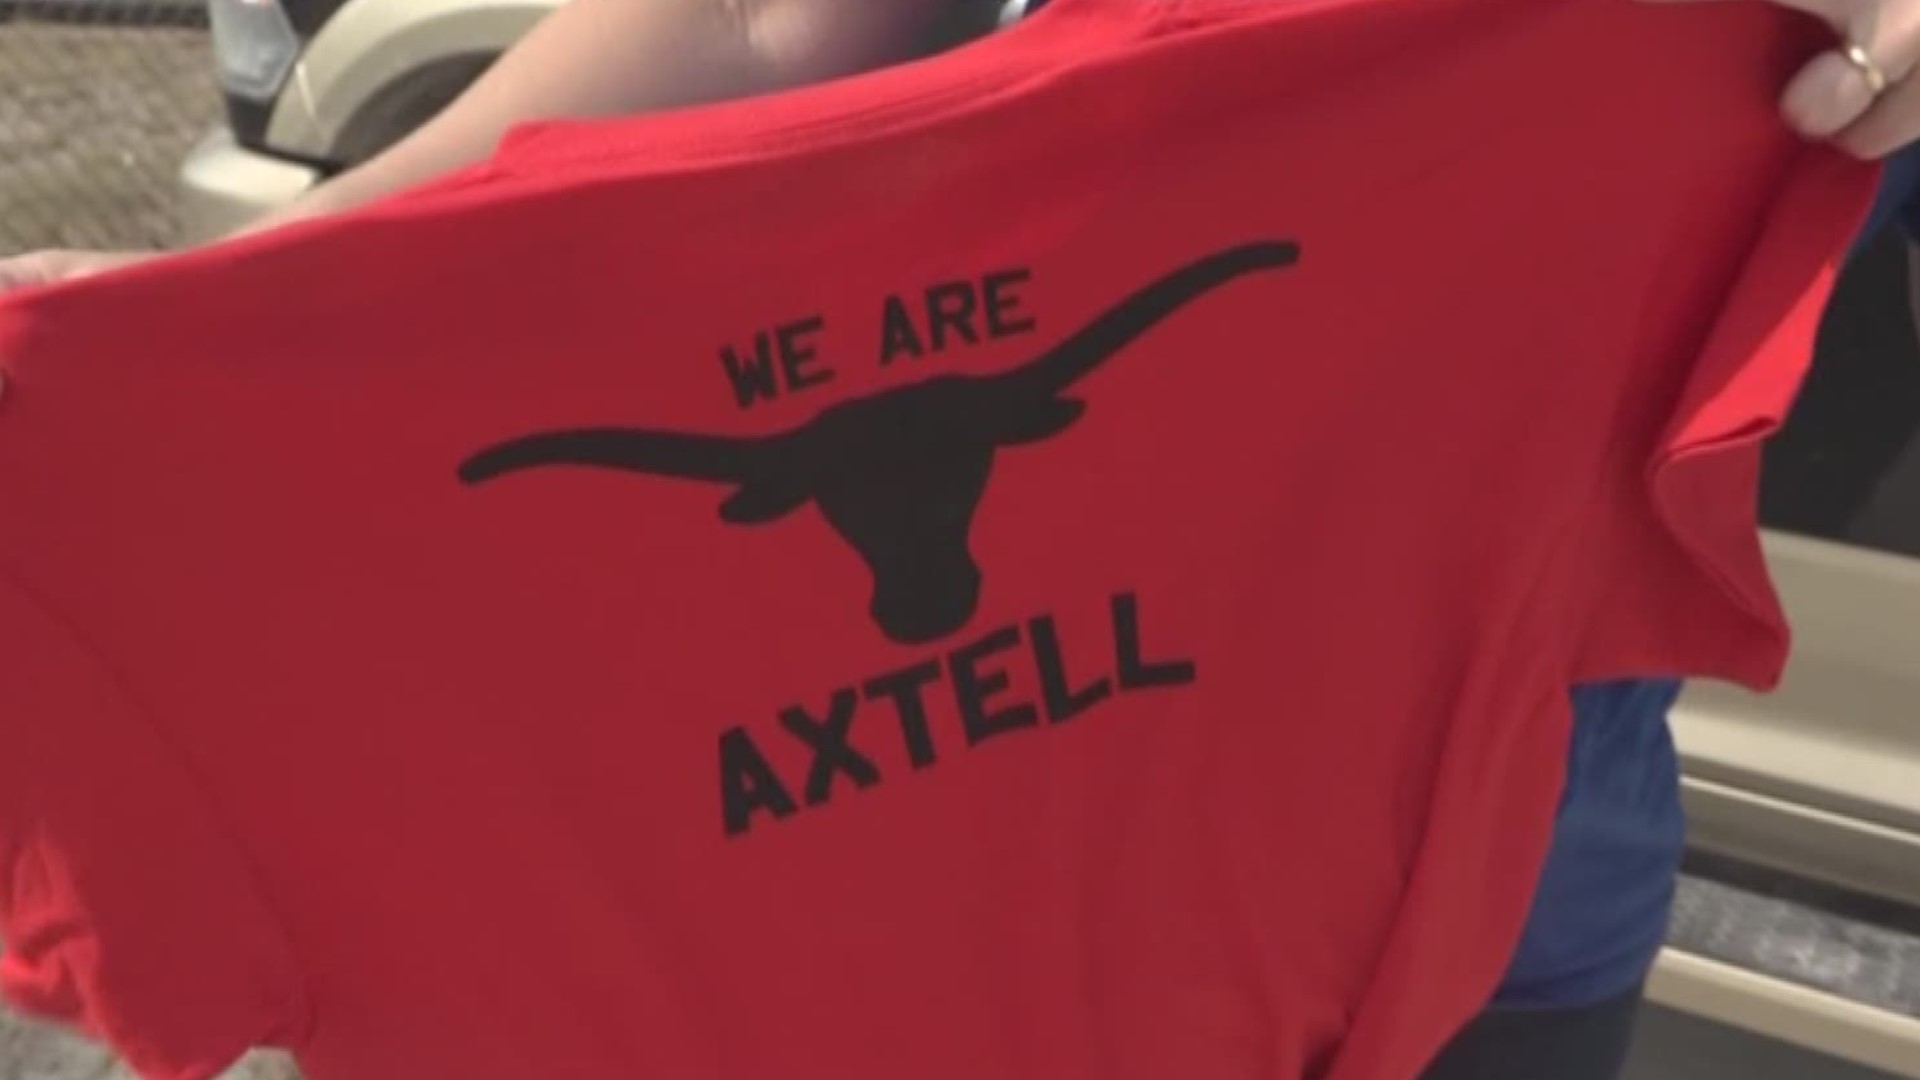 Residents in Axtell rolled up their sleeves for a fight with the City of Waco to oppose a plan to build a landfill near a local cemetery.